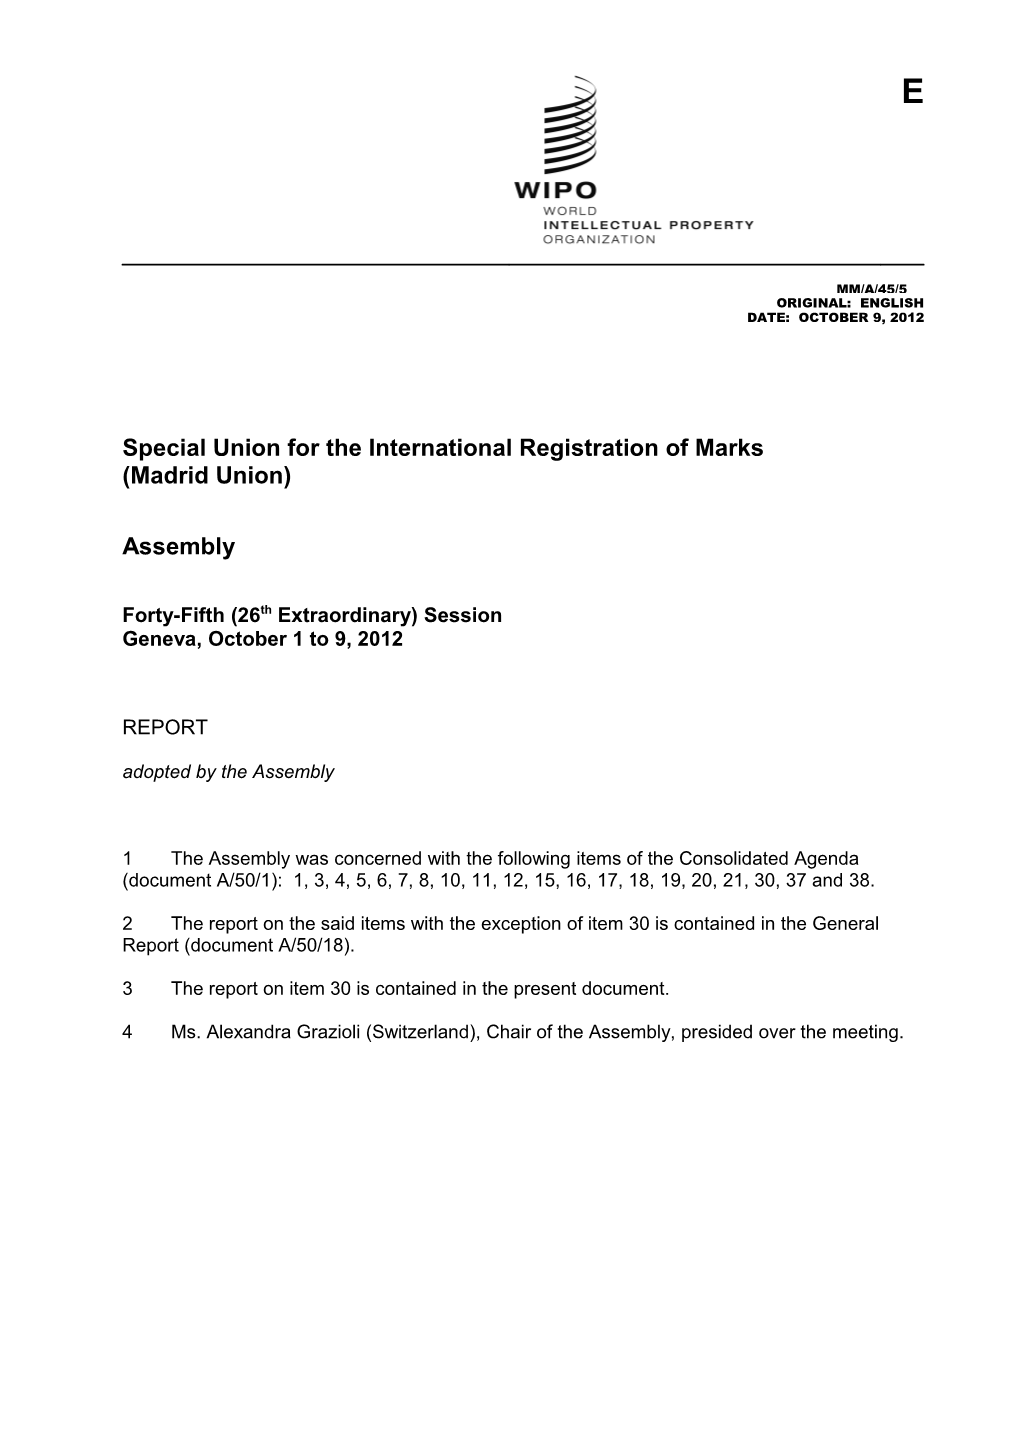 Special Union for the International Registration of Marks